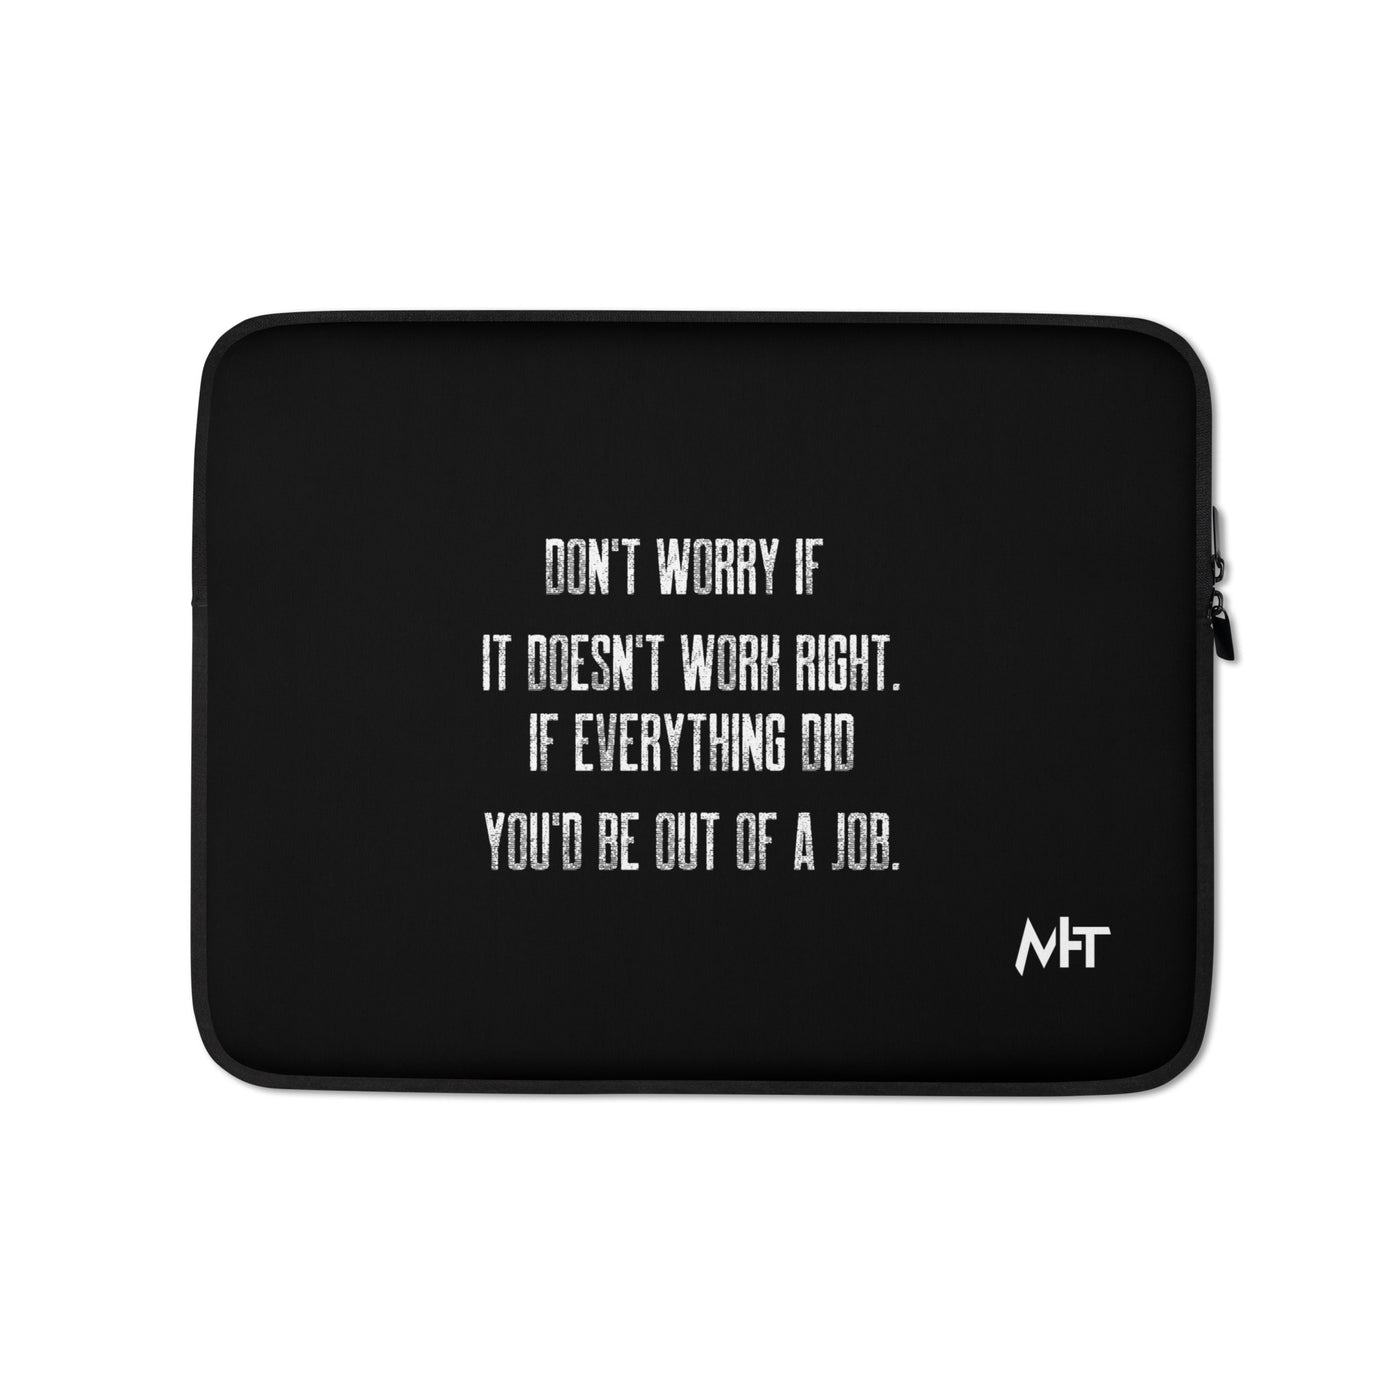 Don't worry if it doesn't work right: if everything did, you would be out of your job V2 - Laptop Sleeve